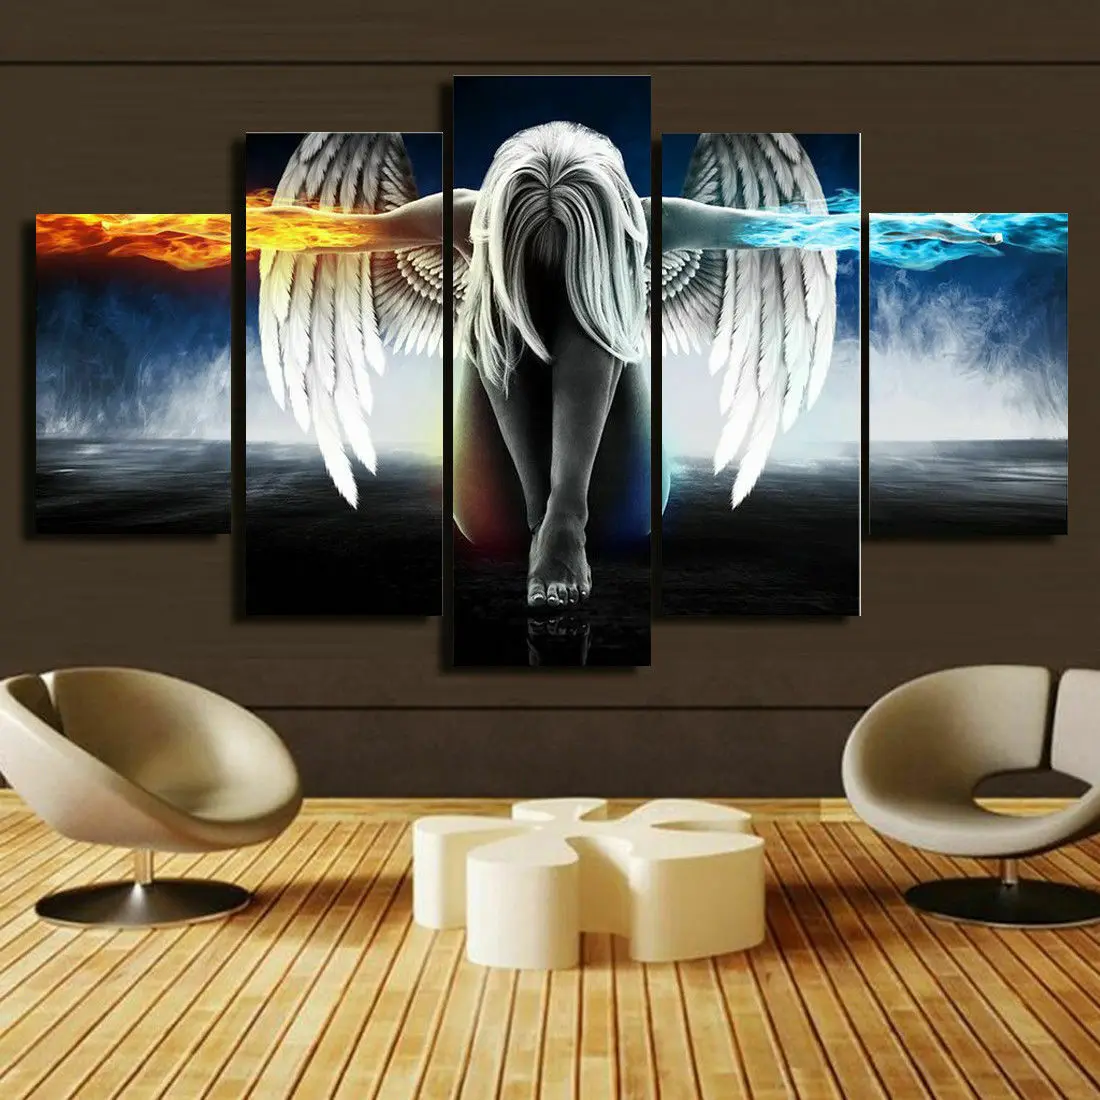 

Angel Devil Girl Ice & Fire Movies Canvas Prints Painting Wall Art Home Decor HD Print Paintings Pictures Poster 5 Pieces